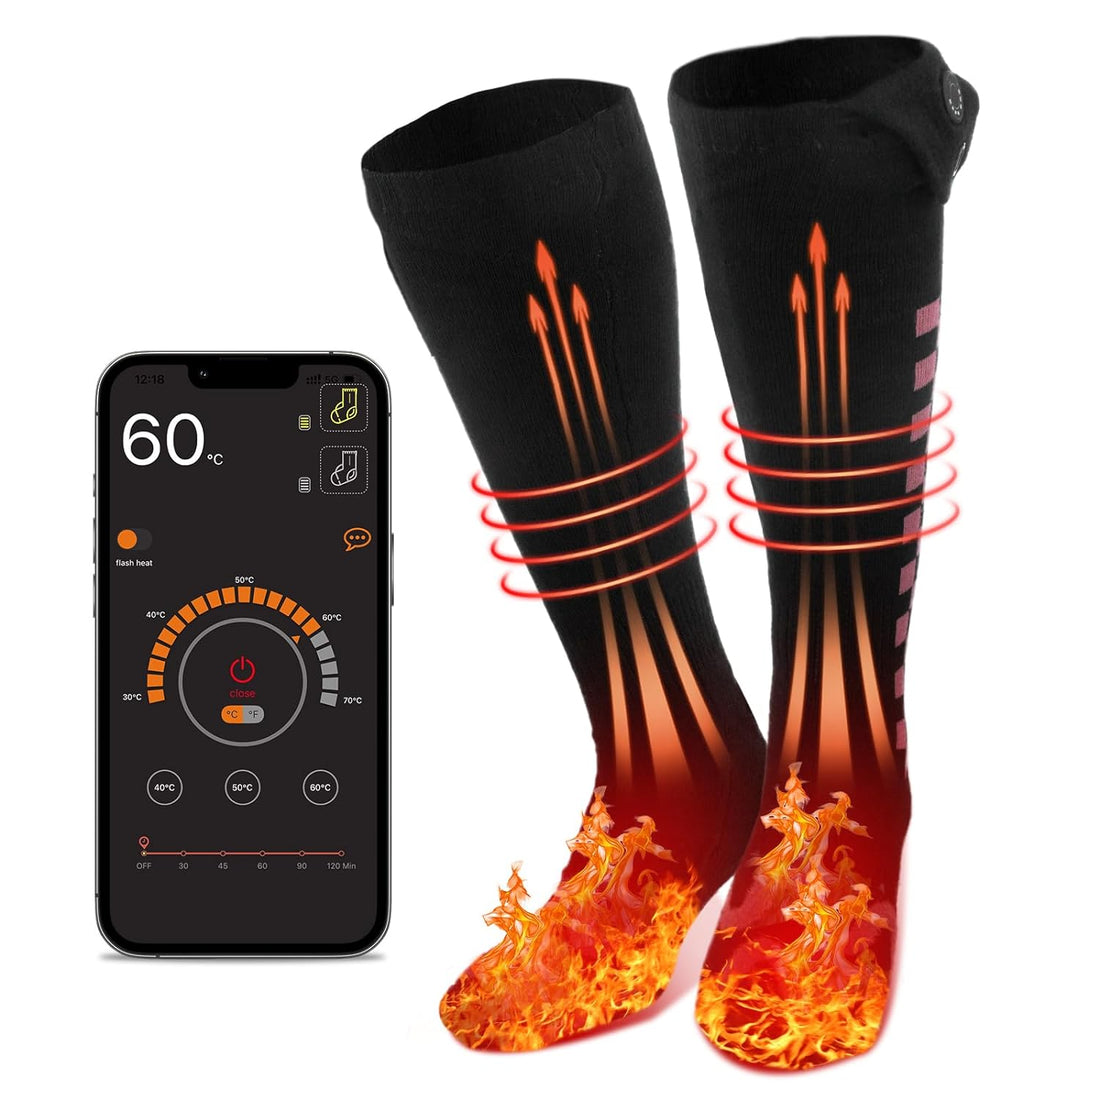 Heated Socks for Men Women 7.4V Rechargeable Battery Electric Socks with Smart APP Temperature Control Heated Socks Women for Outdoor Riding Hunting Hiking Camping Skiing Warm Winter Socks